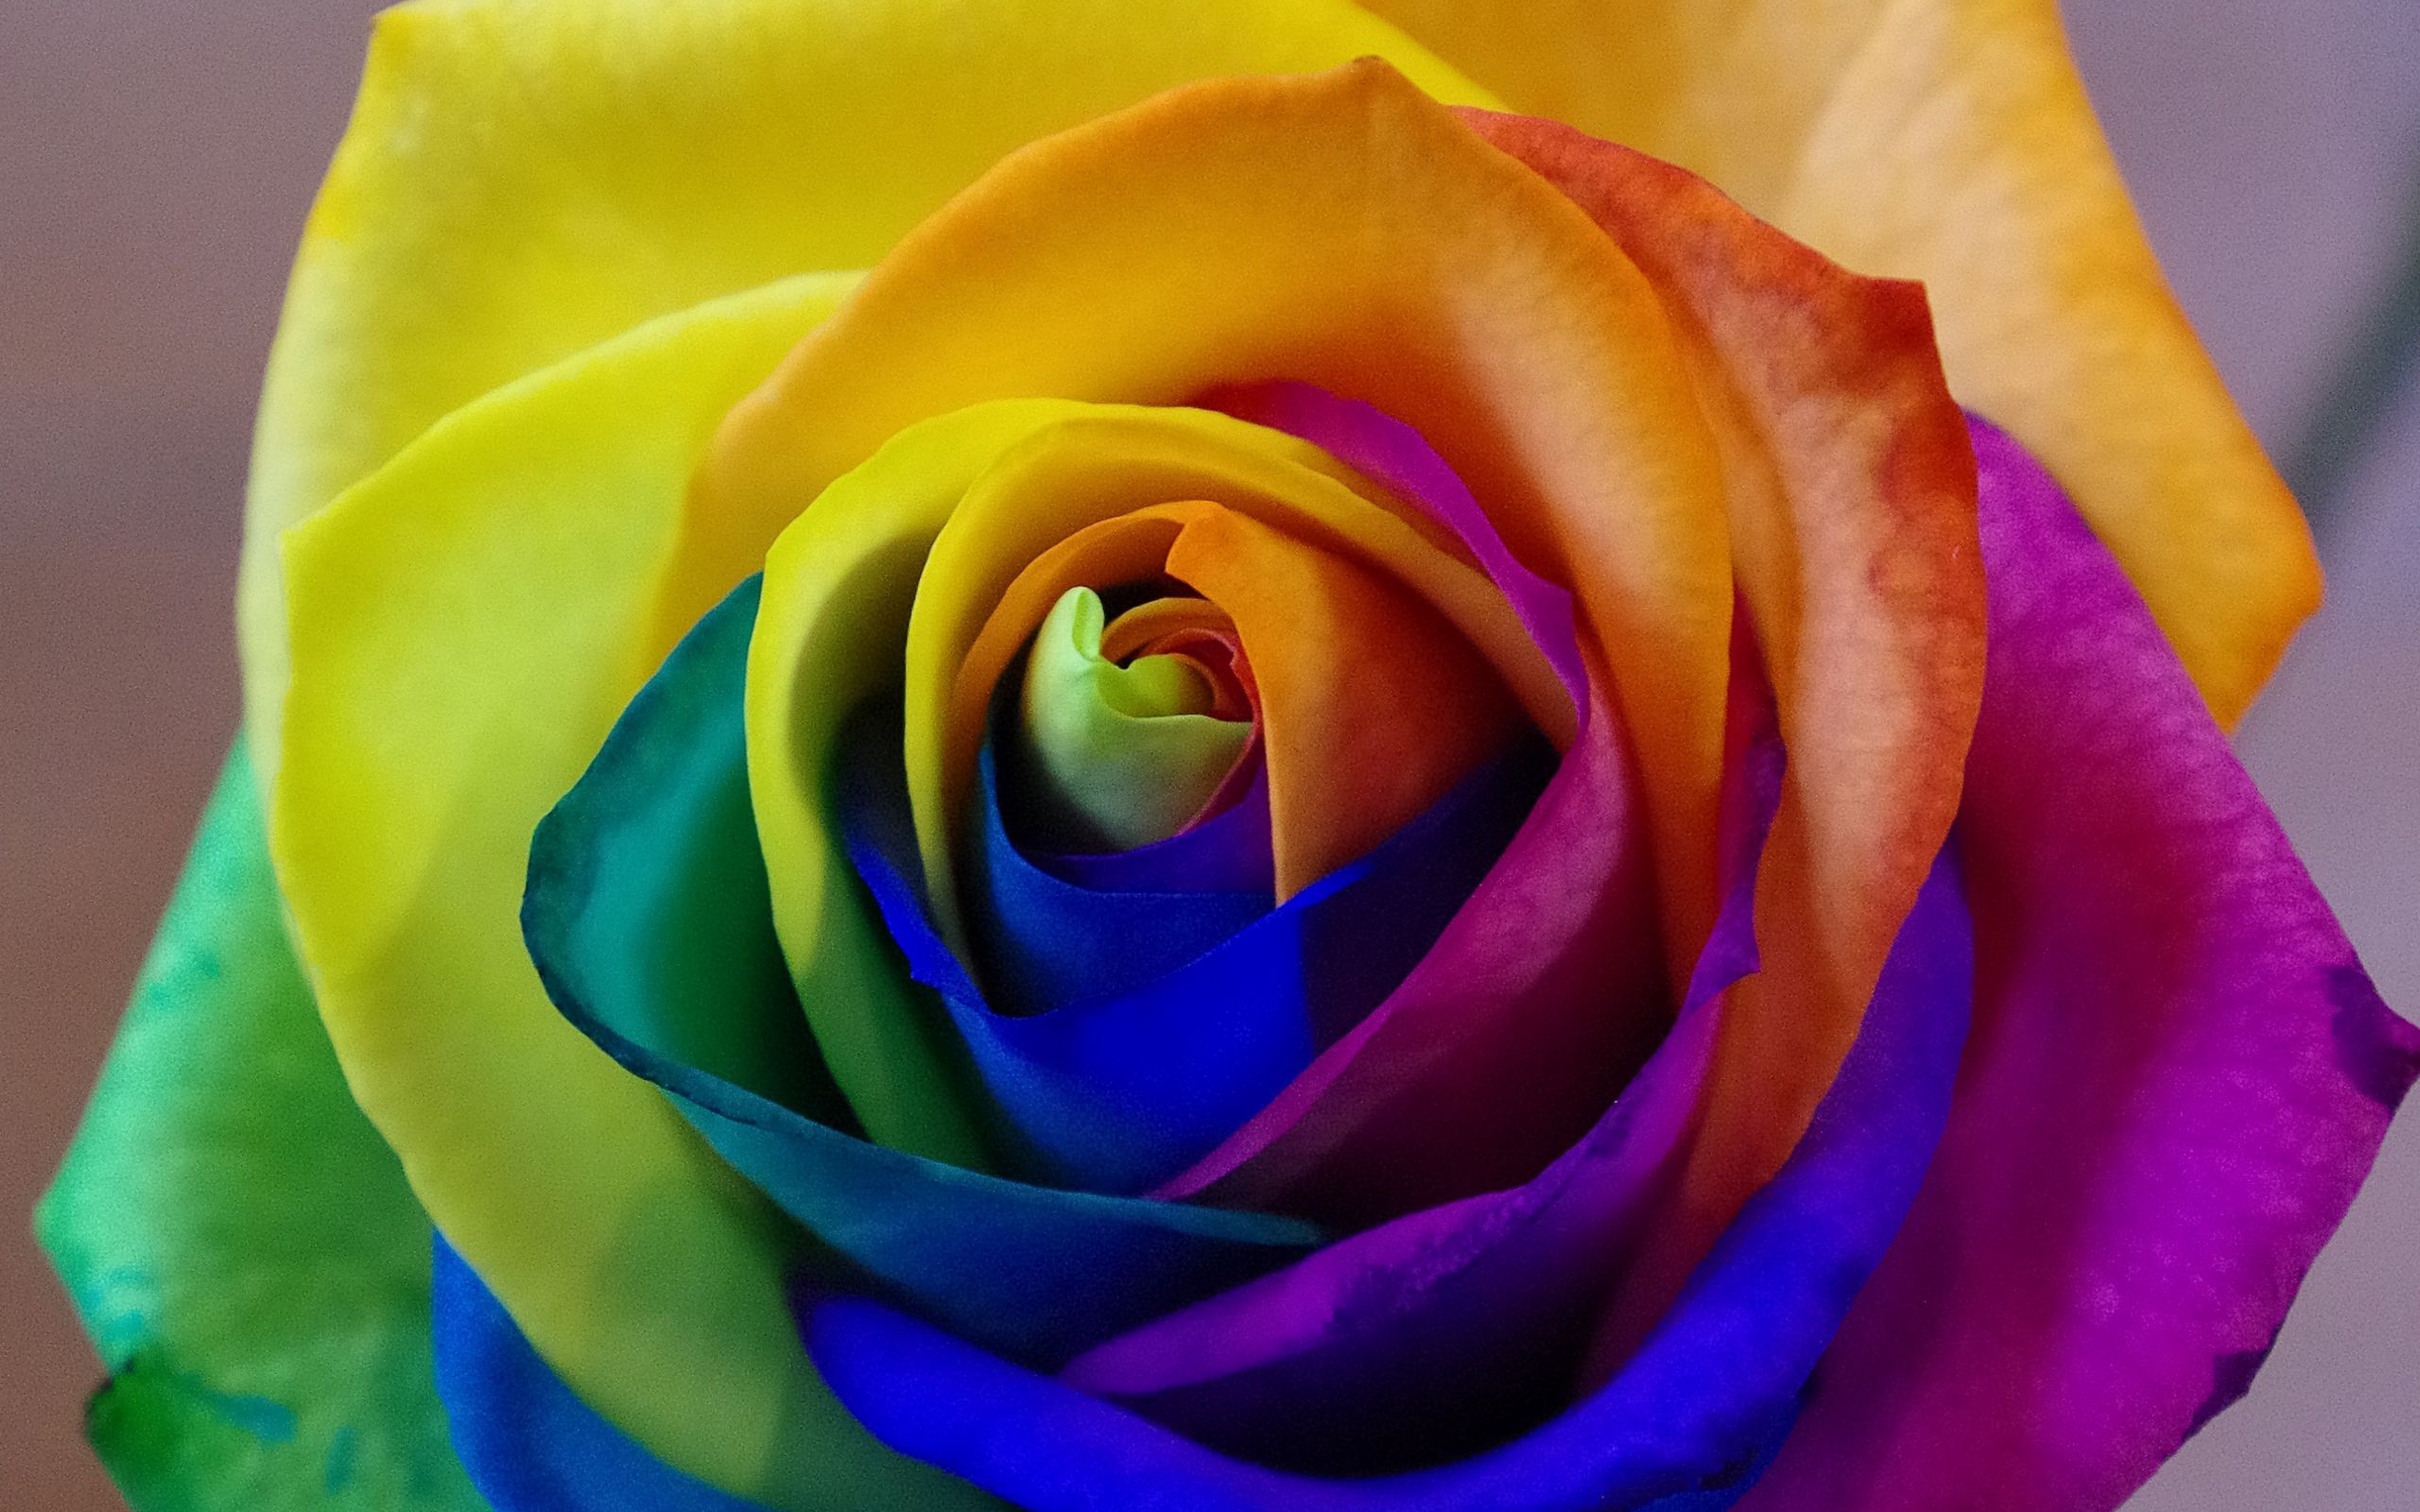 Download wallpaper 2560x1600 rose, rainbow, bud, colorful widescreen 16:10 HD background